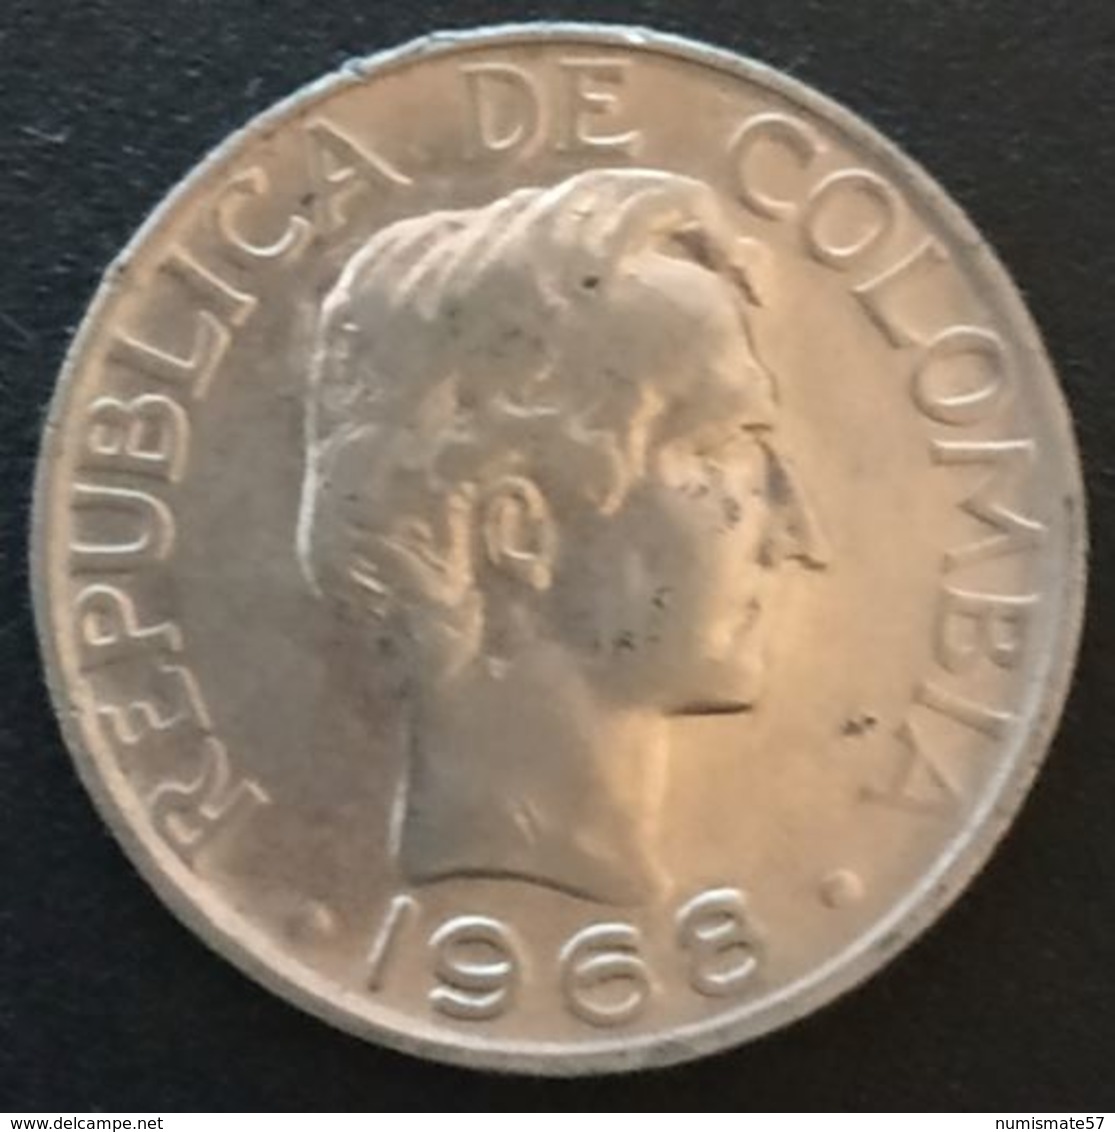 COLOMBIE - COLOMBIA - 20 CENTAVOS 1968 - KM 227 - Colombie